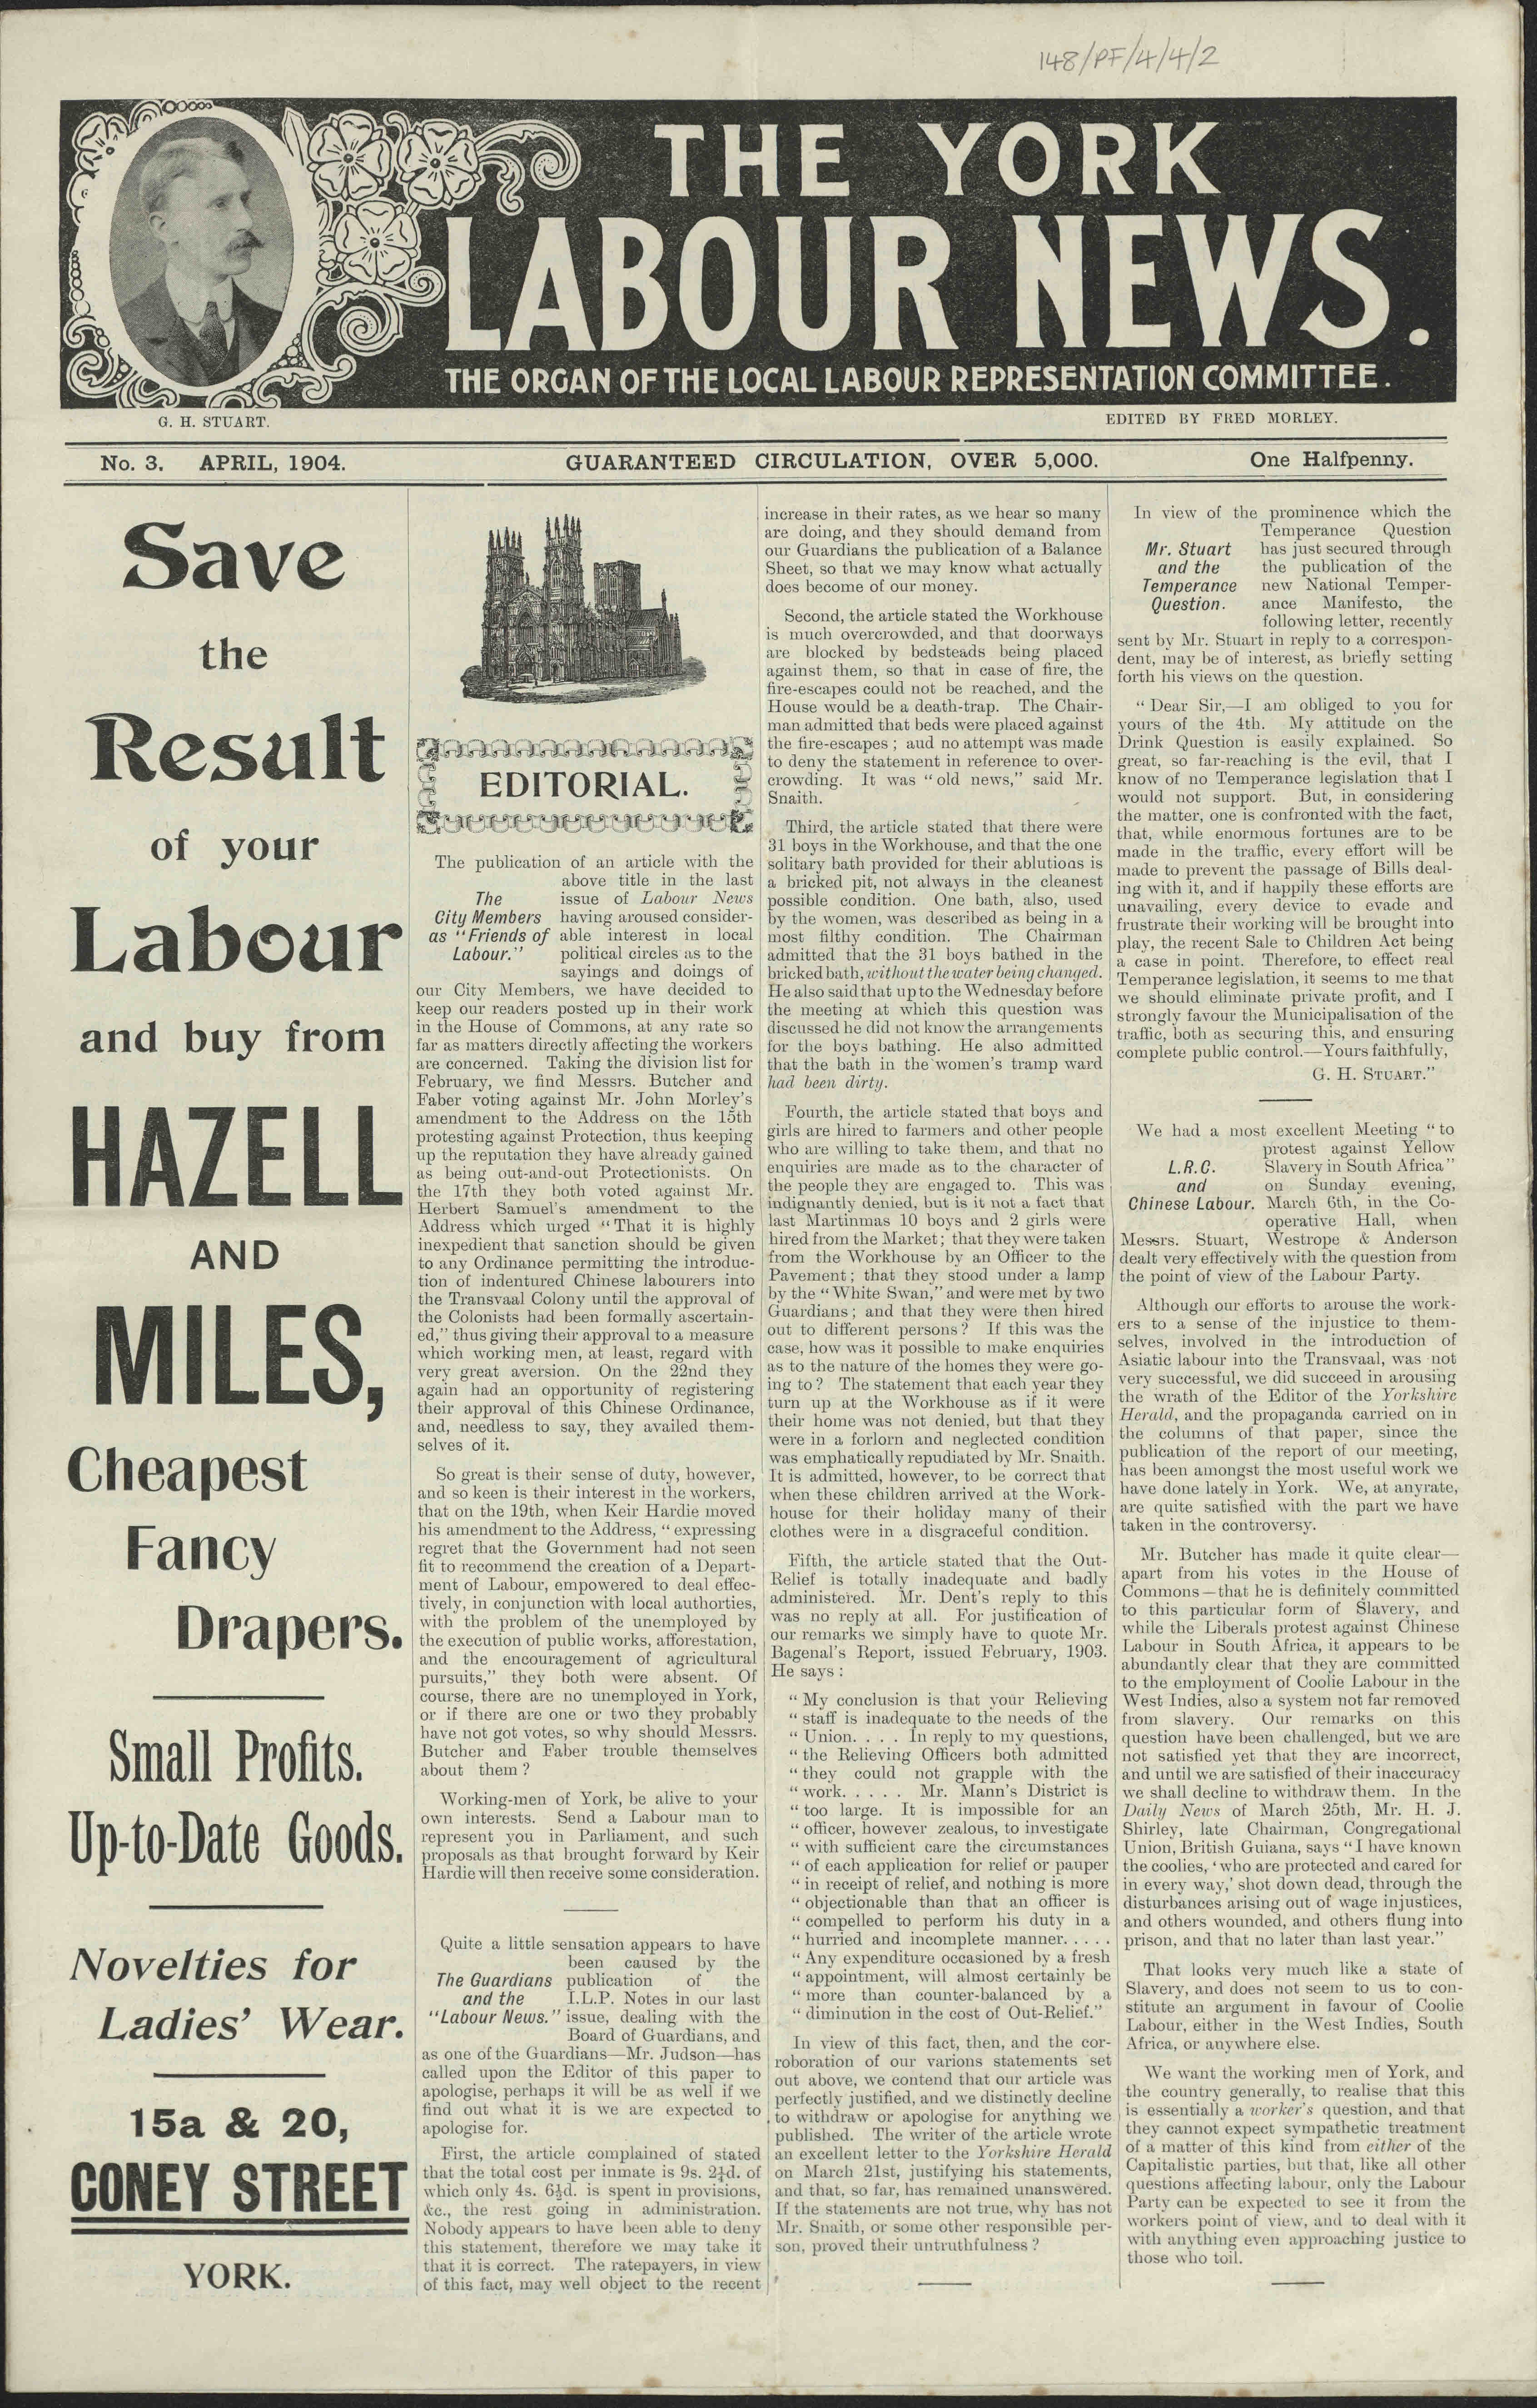 Front page of The York Labour News, no.3, April 1904